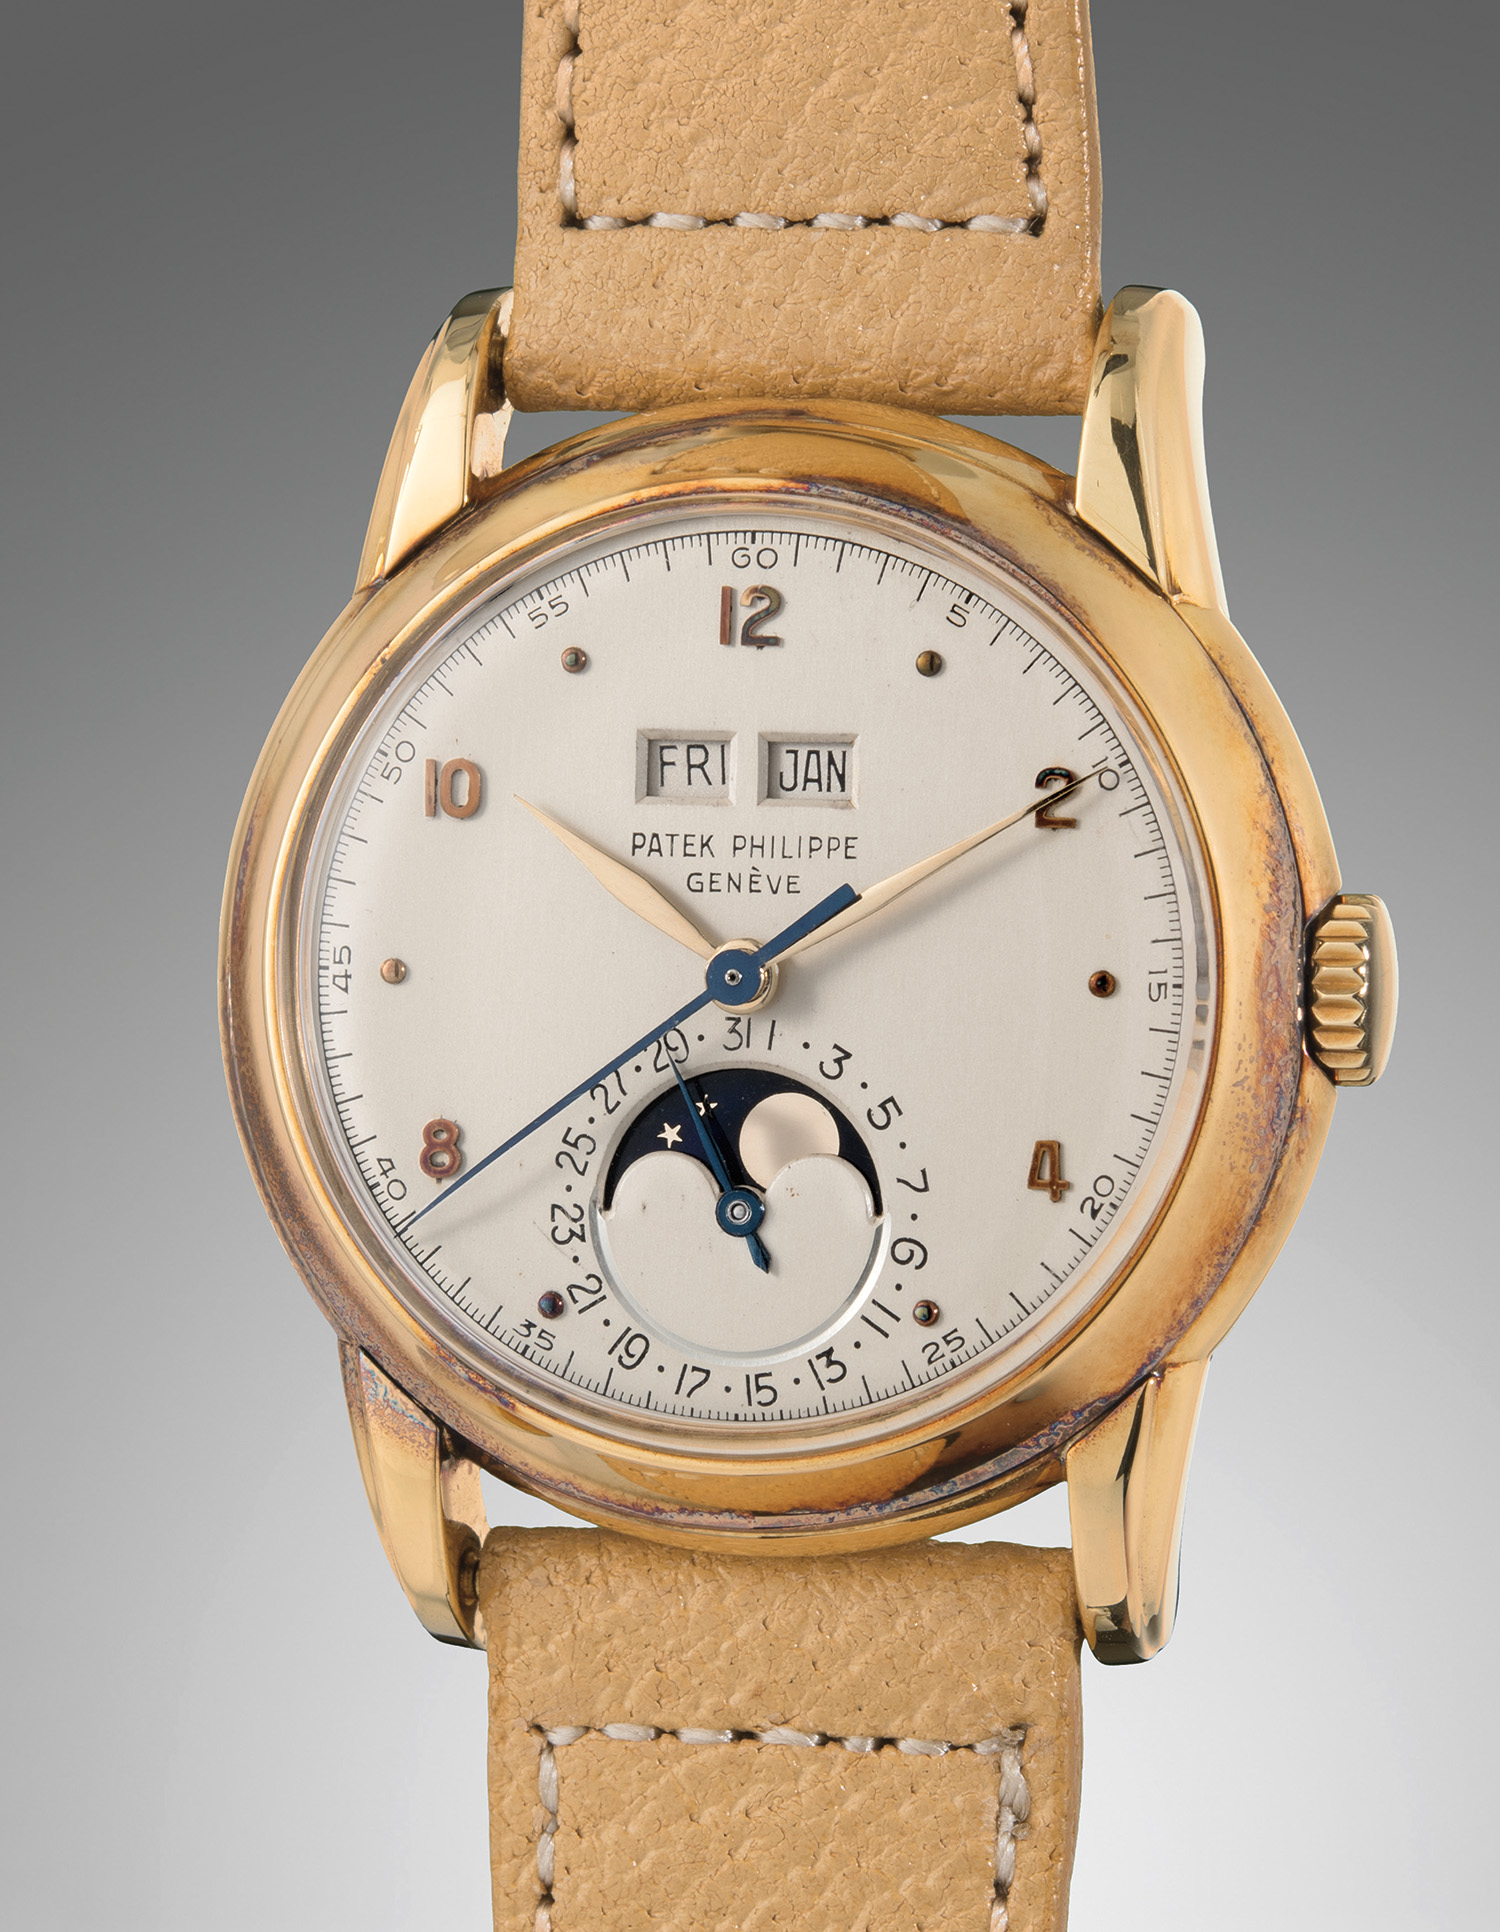 An extremely rare yellow gold perpetual calendar wristwatch, sold for $362,500.